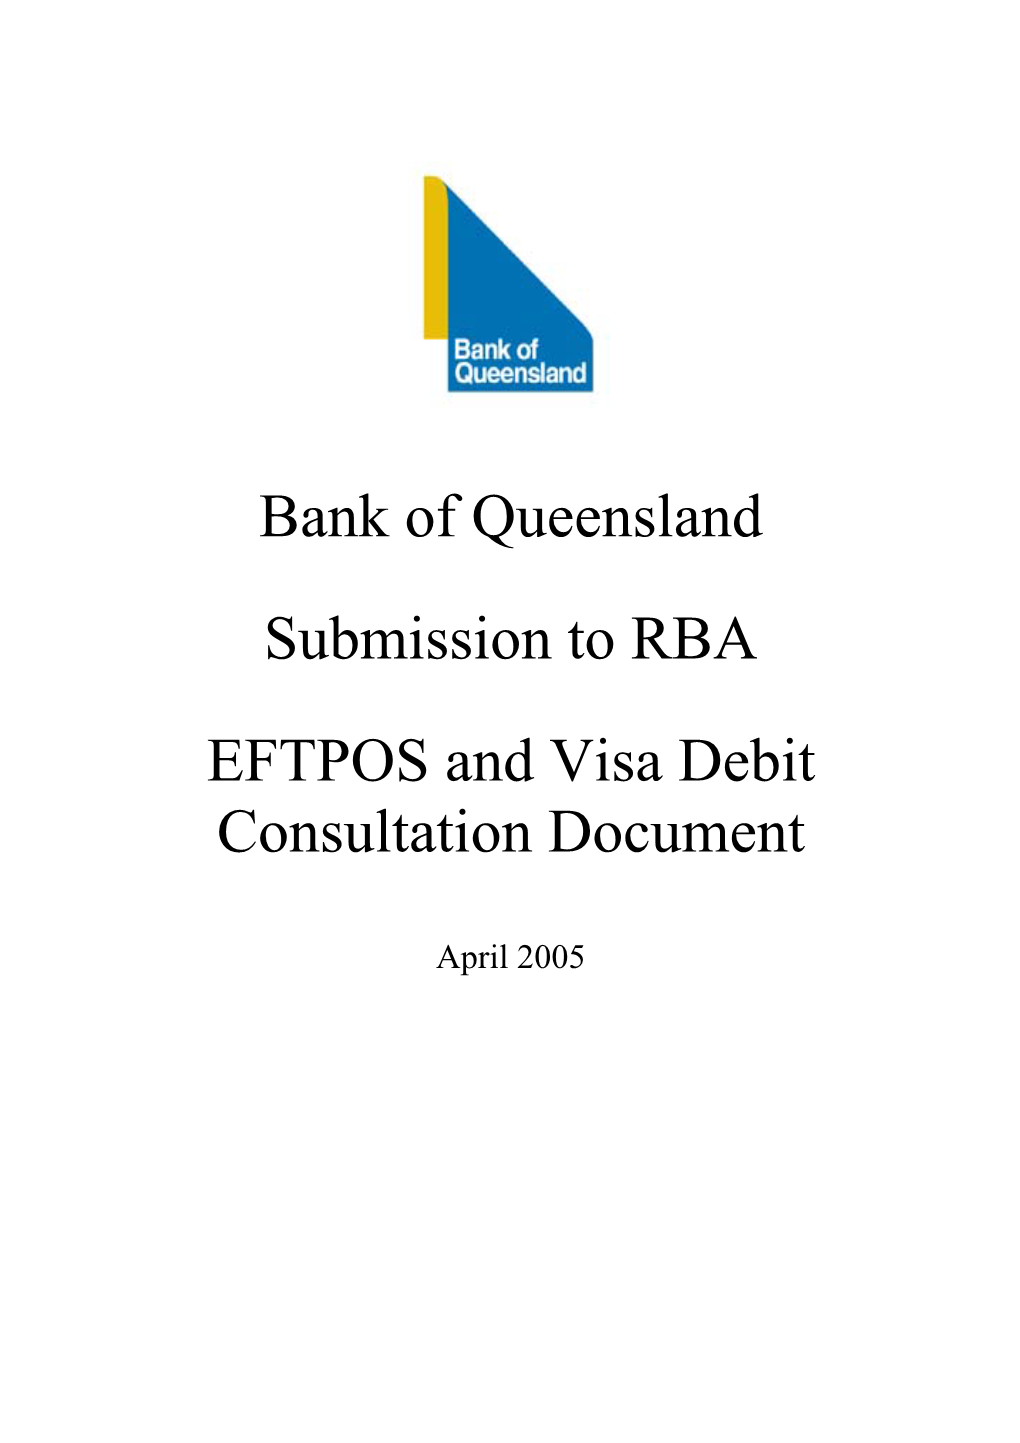 Bank of Queensland Submission to RBA: EFTPOS and Visa Debit